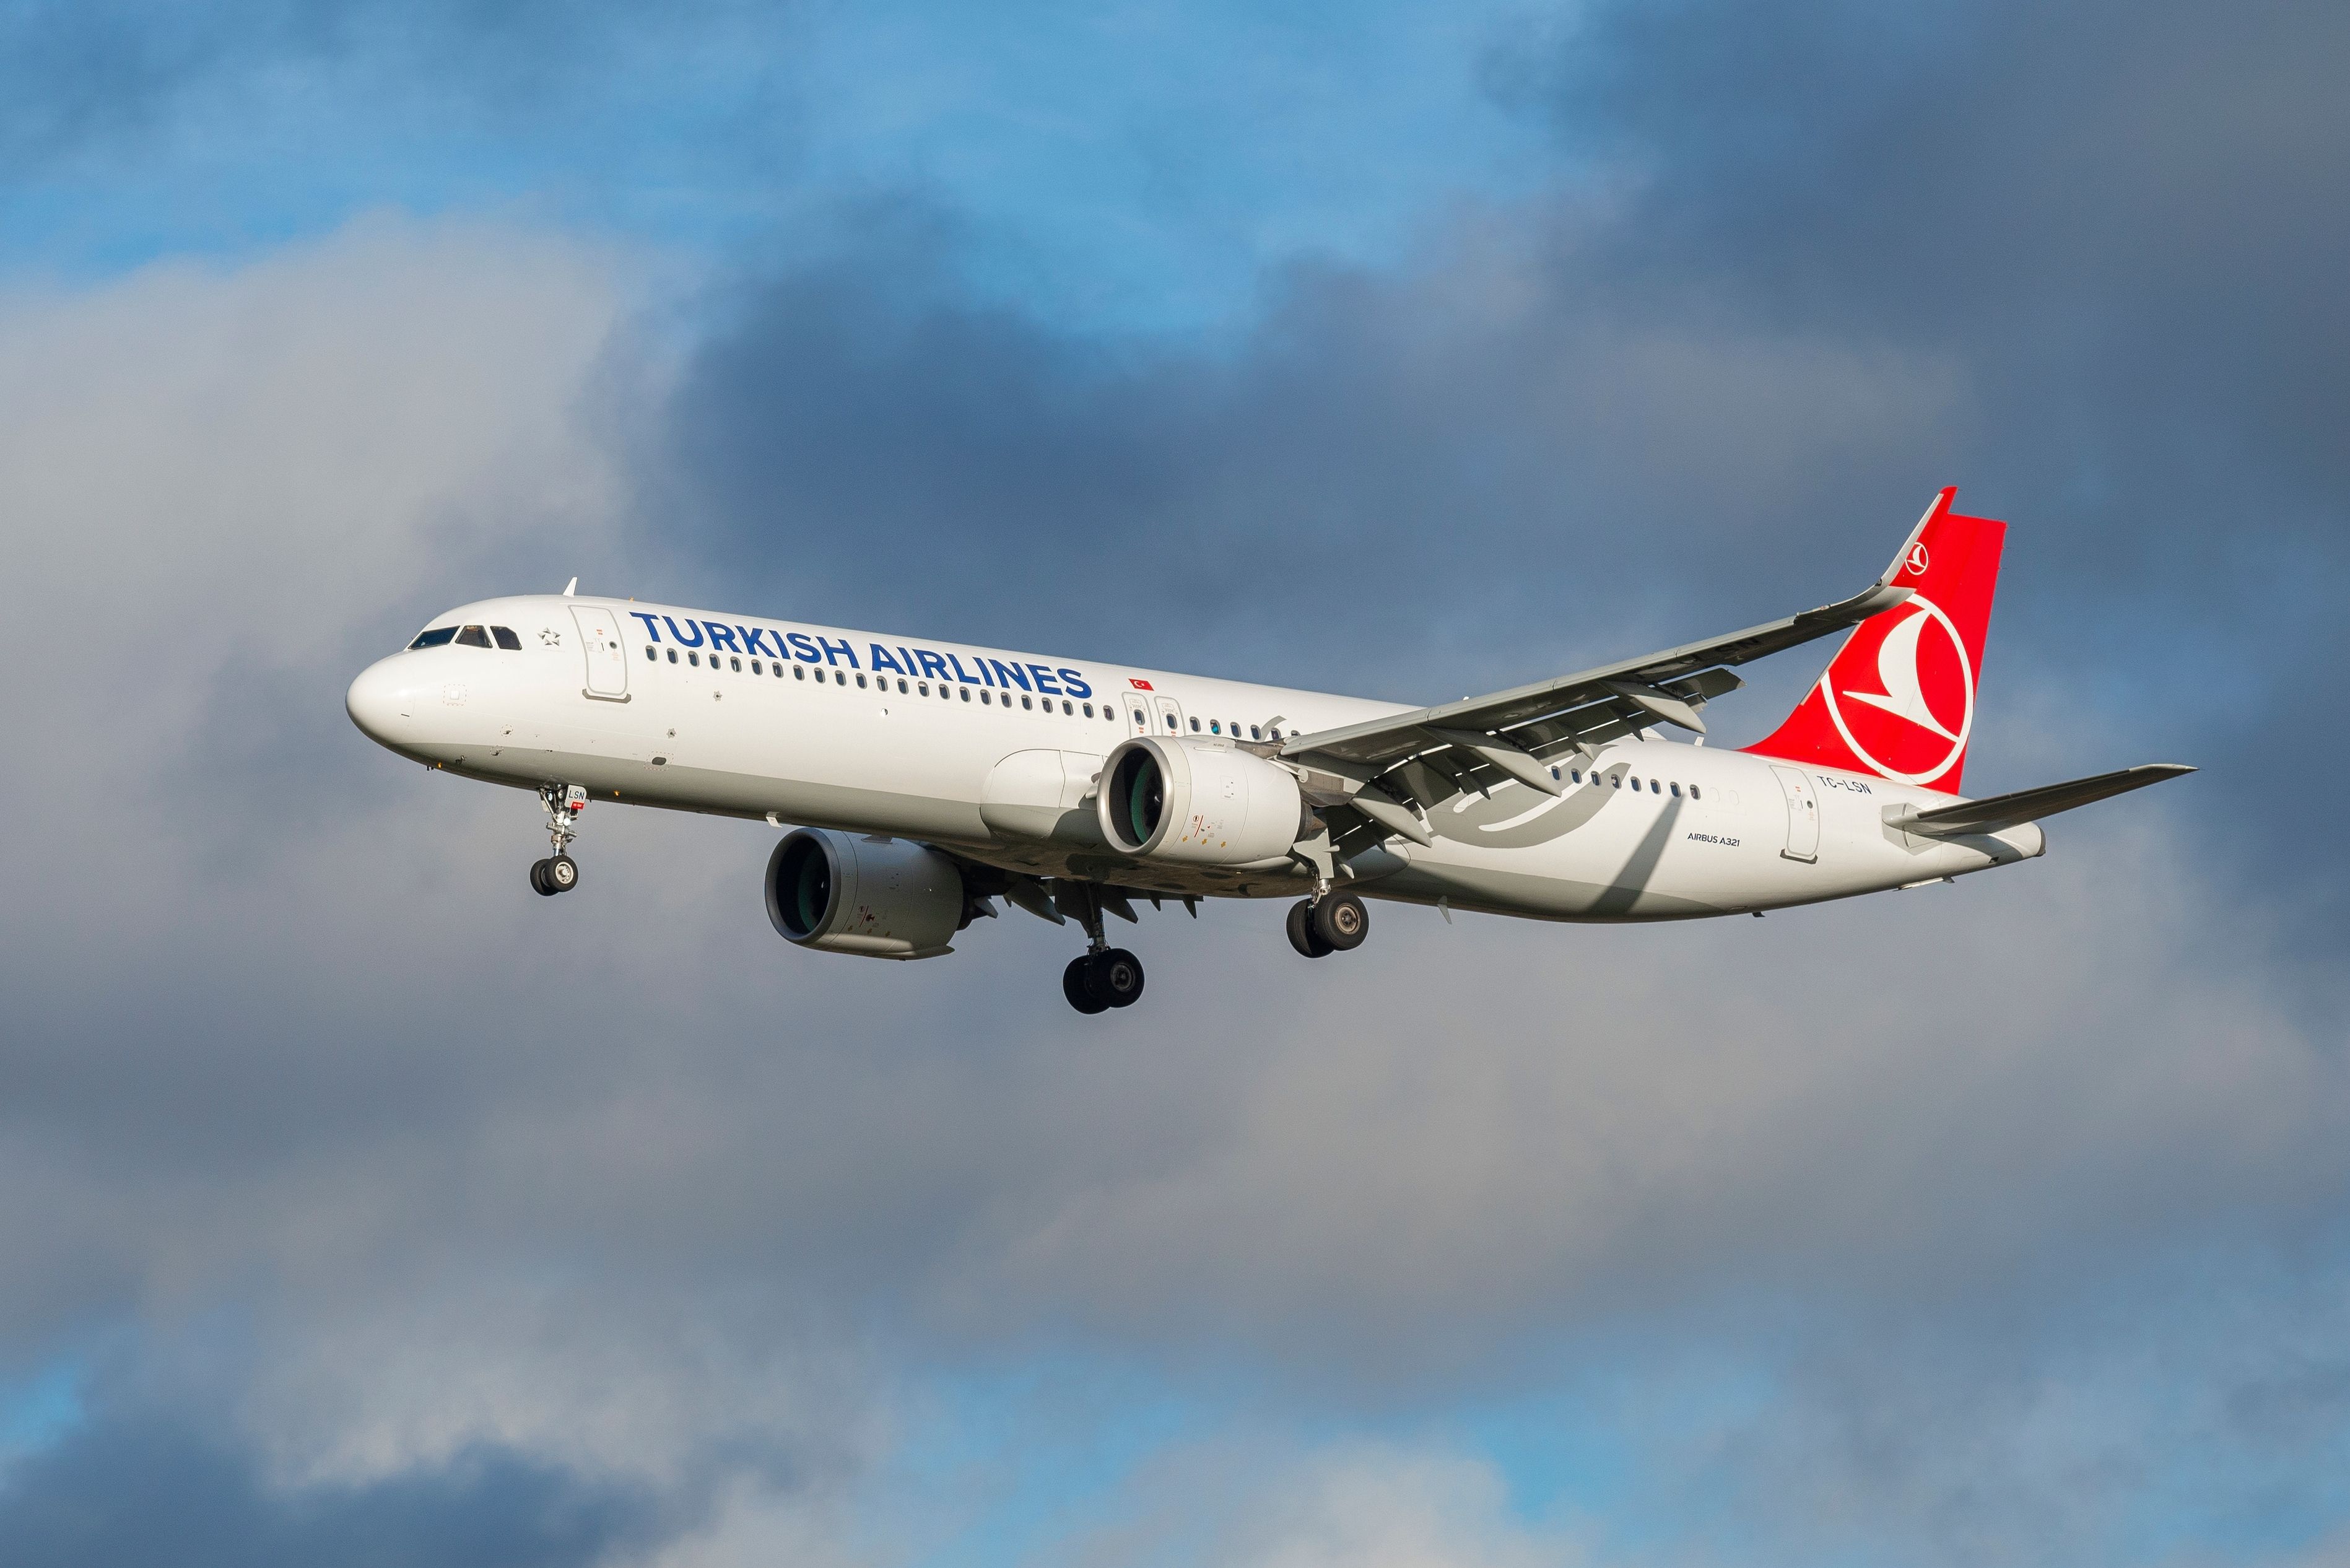 turkish airlines A321neo